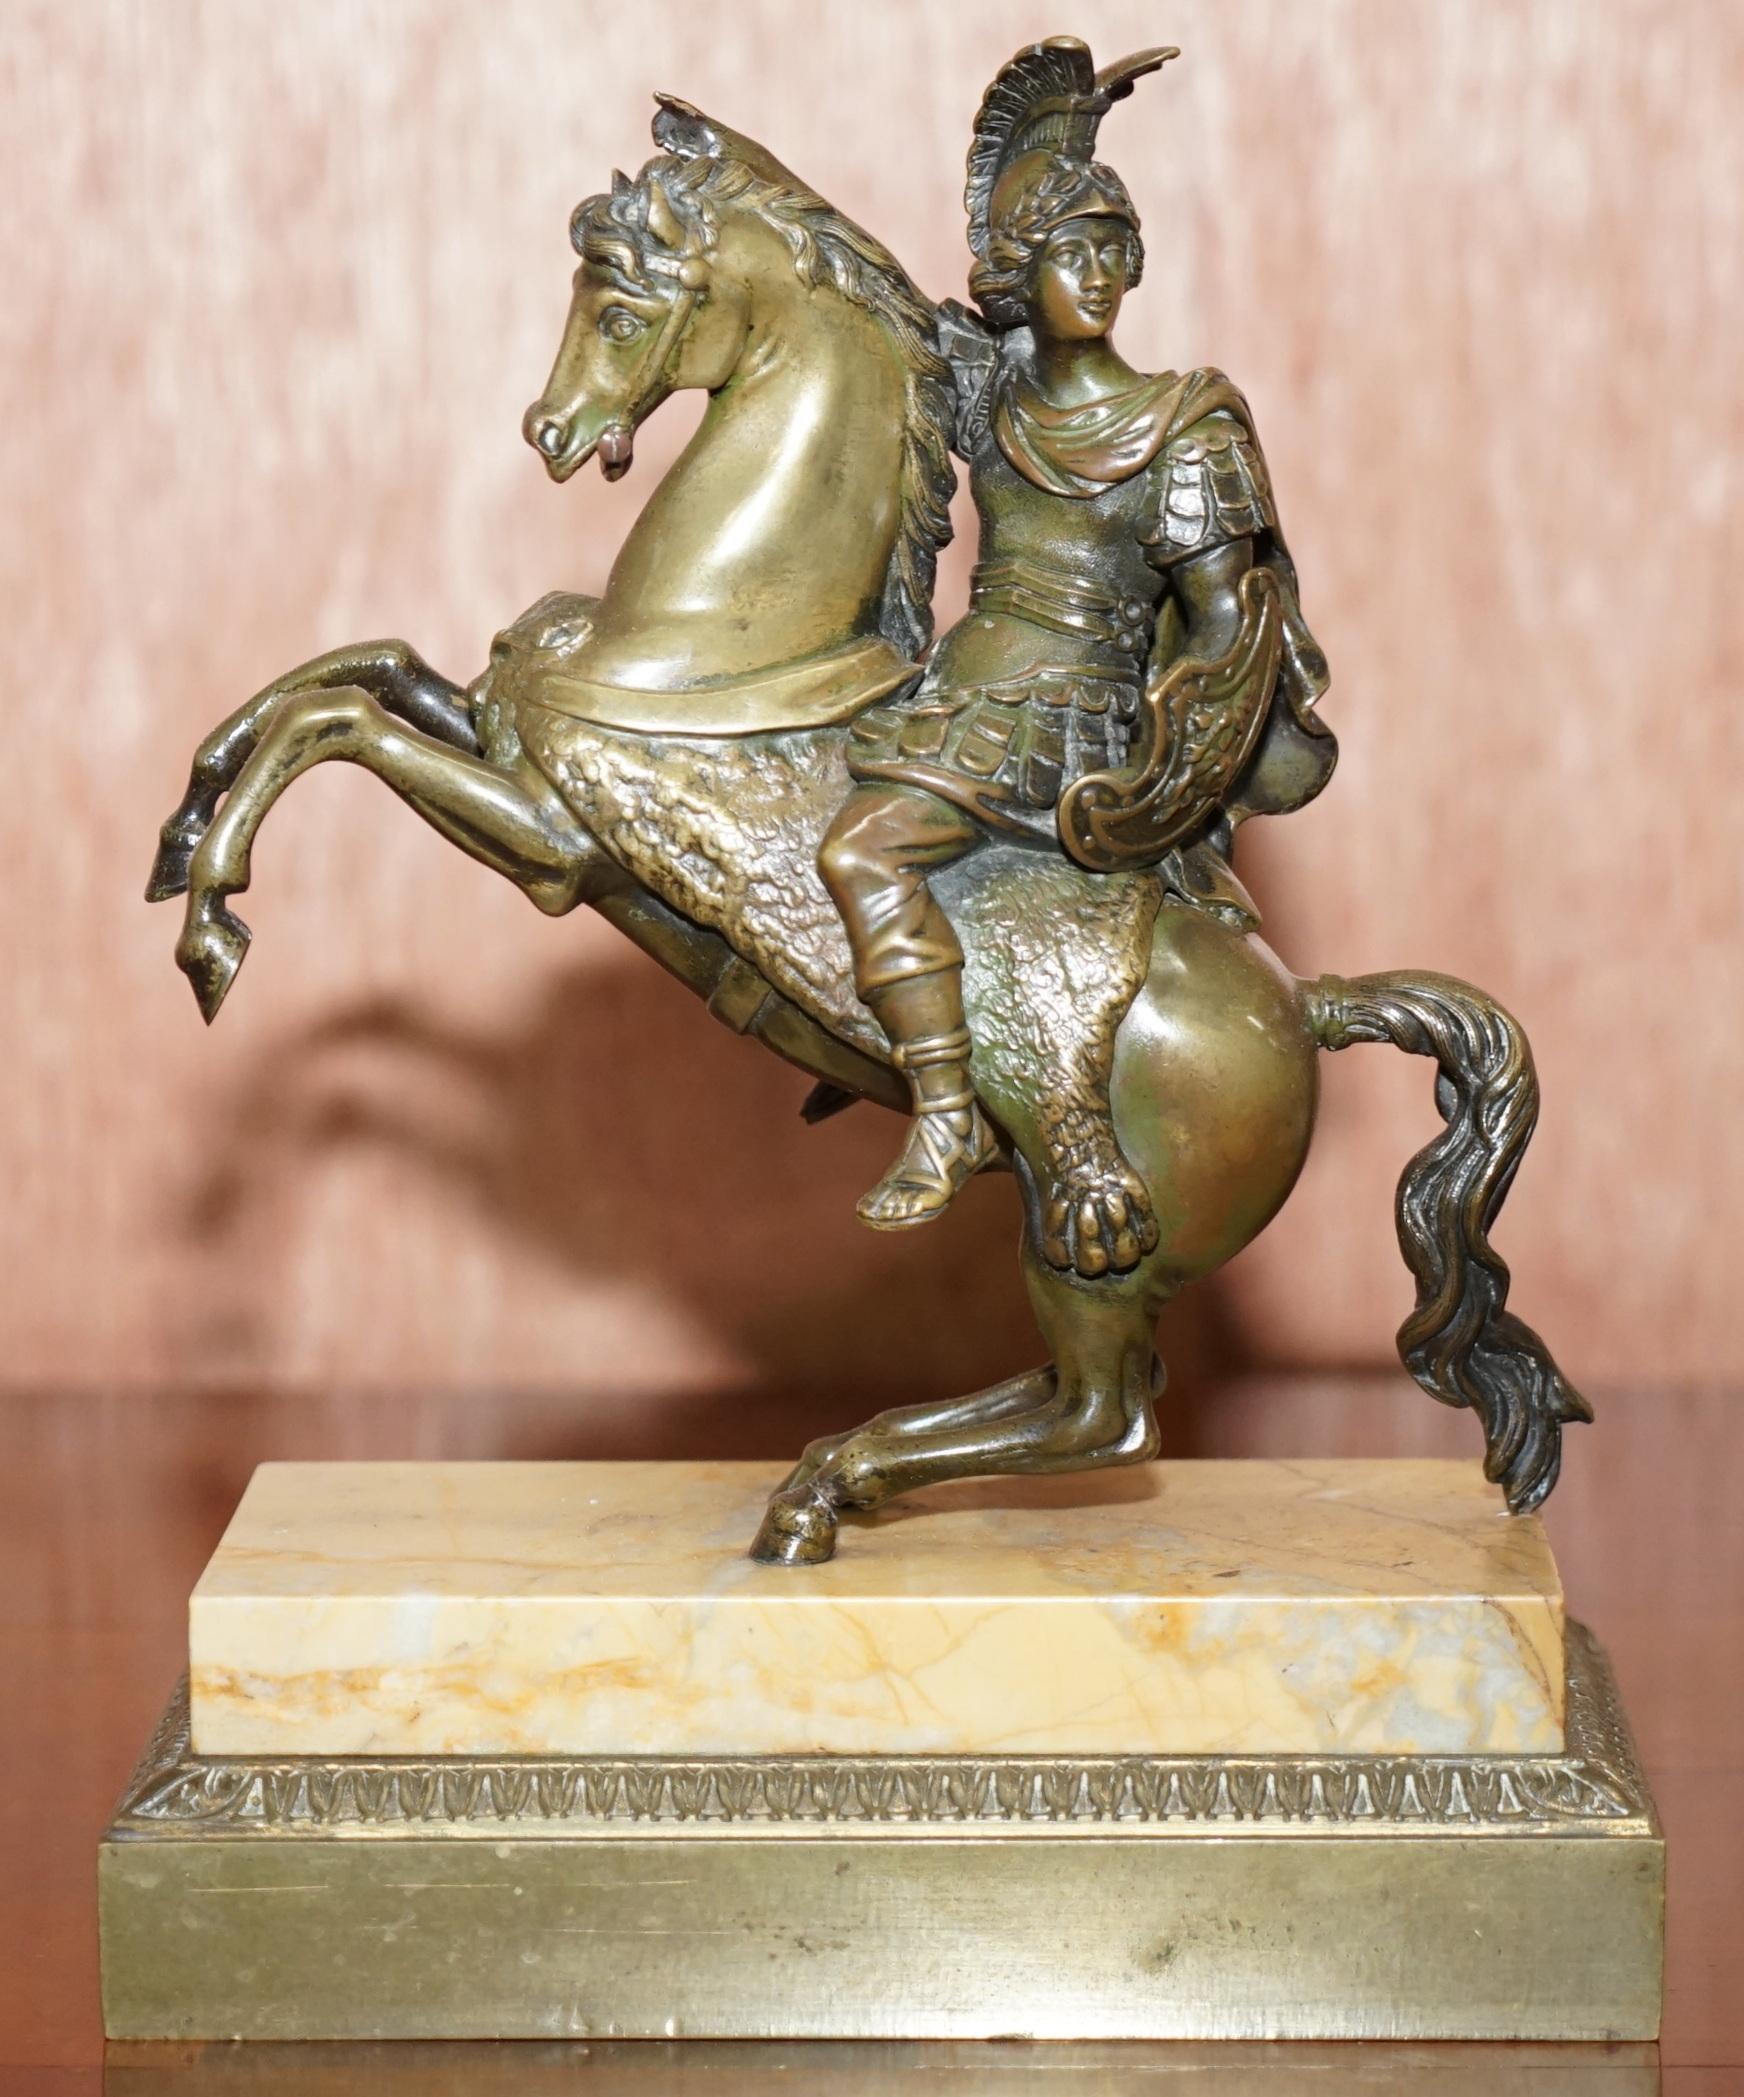 We are delighted to offer for sale this lovely pair of original 19th century equestrian bronzes of a Russian Cossack and Roman Solider riding horses

A good looking and well made pair, they are seated on marble bases, most likely they were very